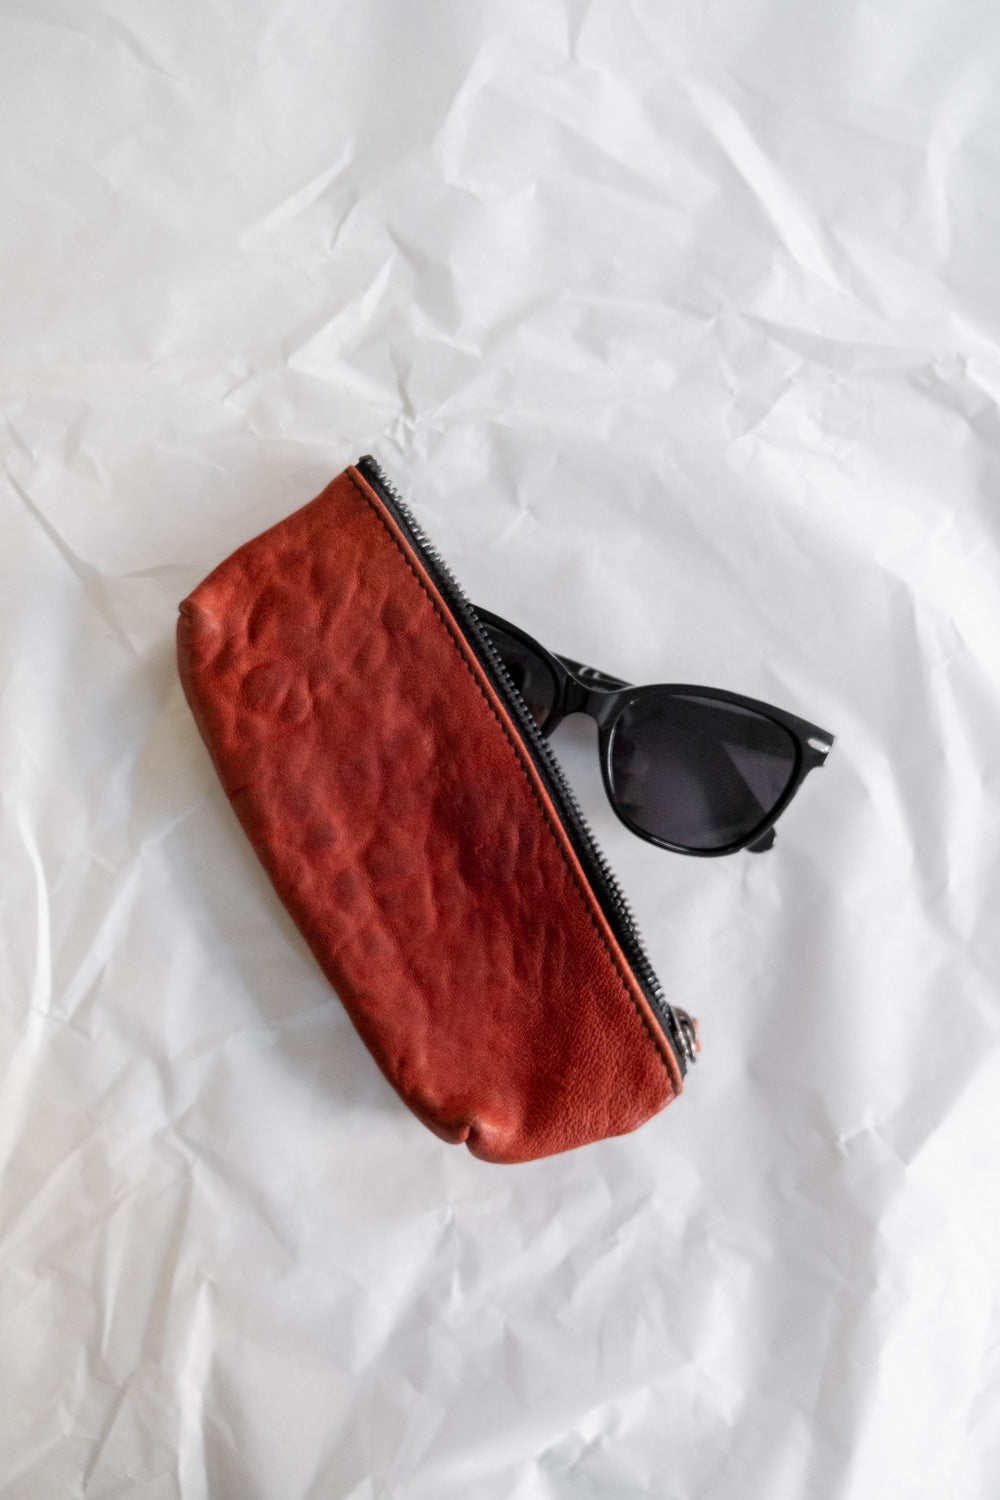 The Mialuis leather case